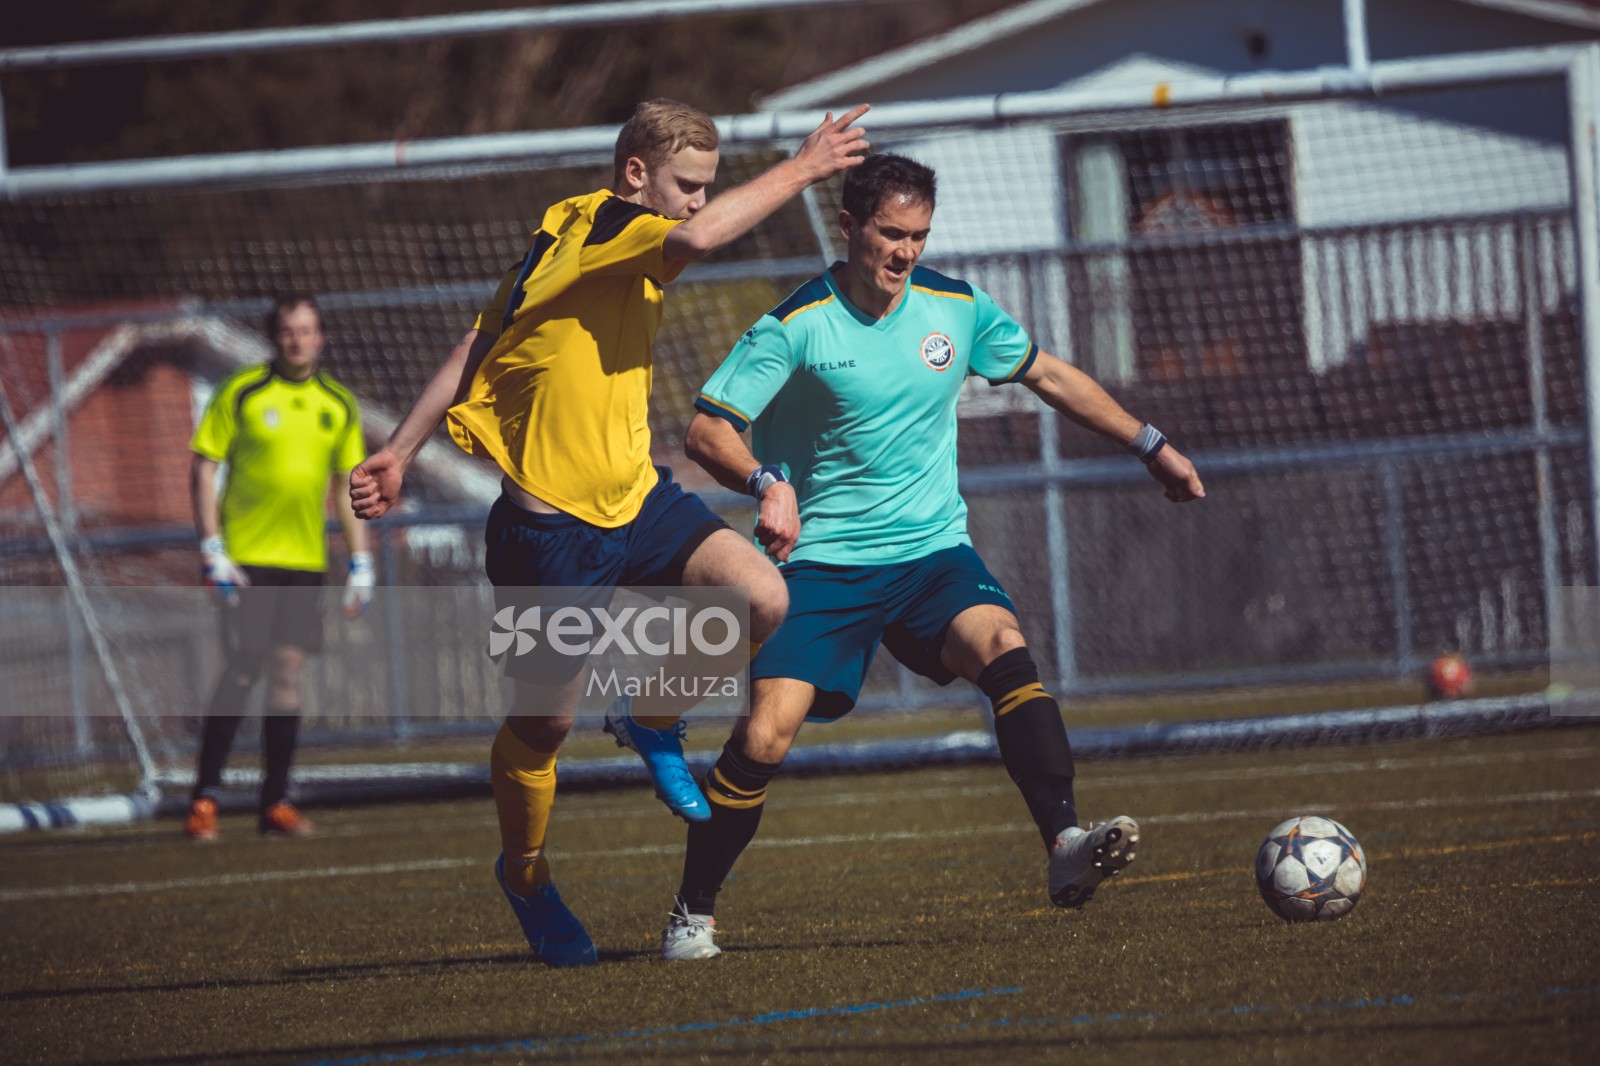 Player in turquoise shirt defending possession of the ball - Sports Zone sunday league